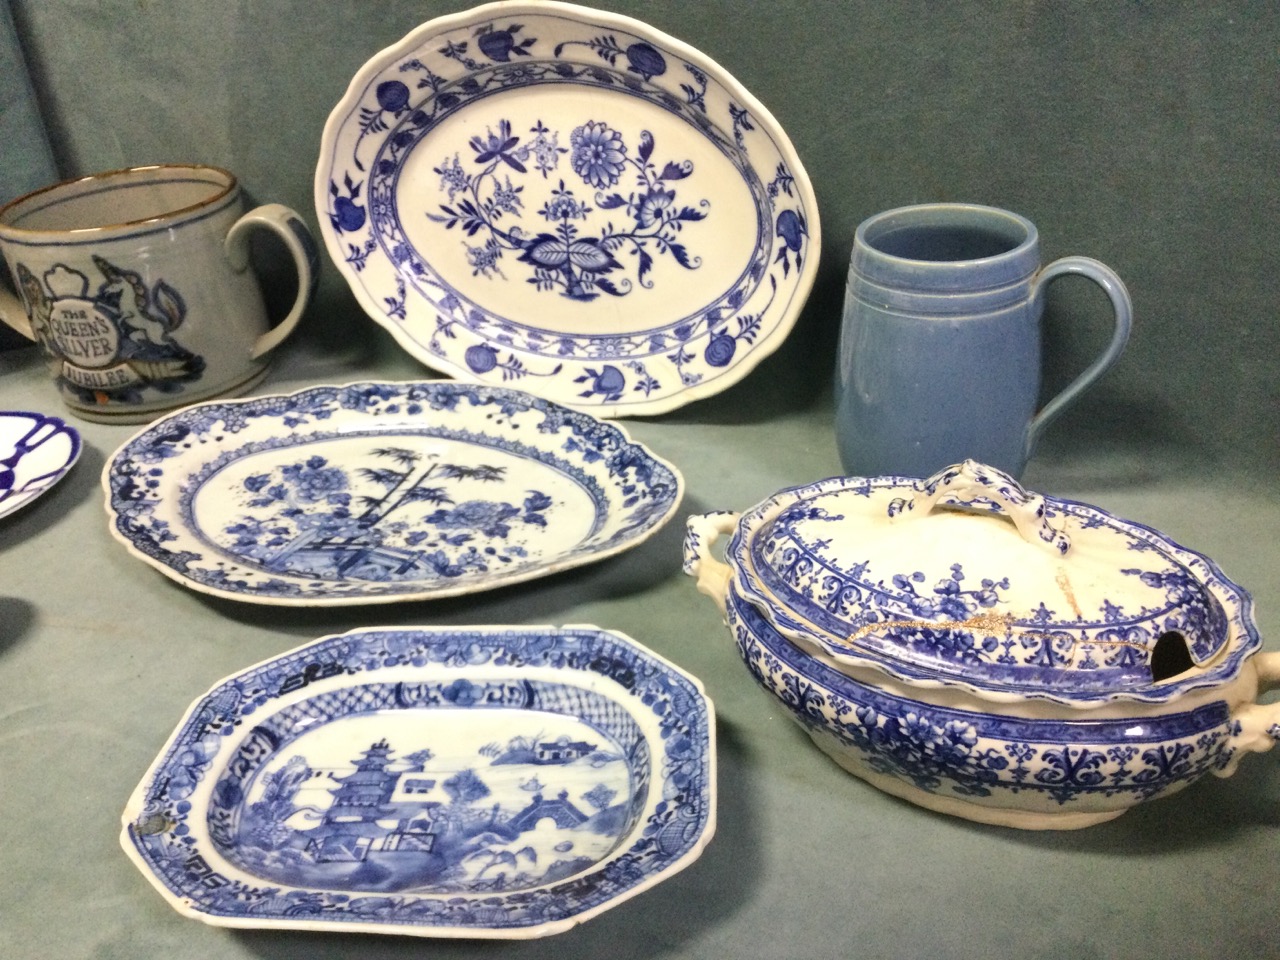 Miscellaneous blue & white ceramics - a Chinese baluster vases & cover, platters, a Burleigh cow - Image 2 of 3